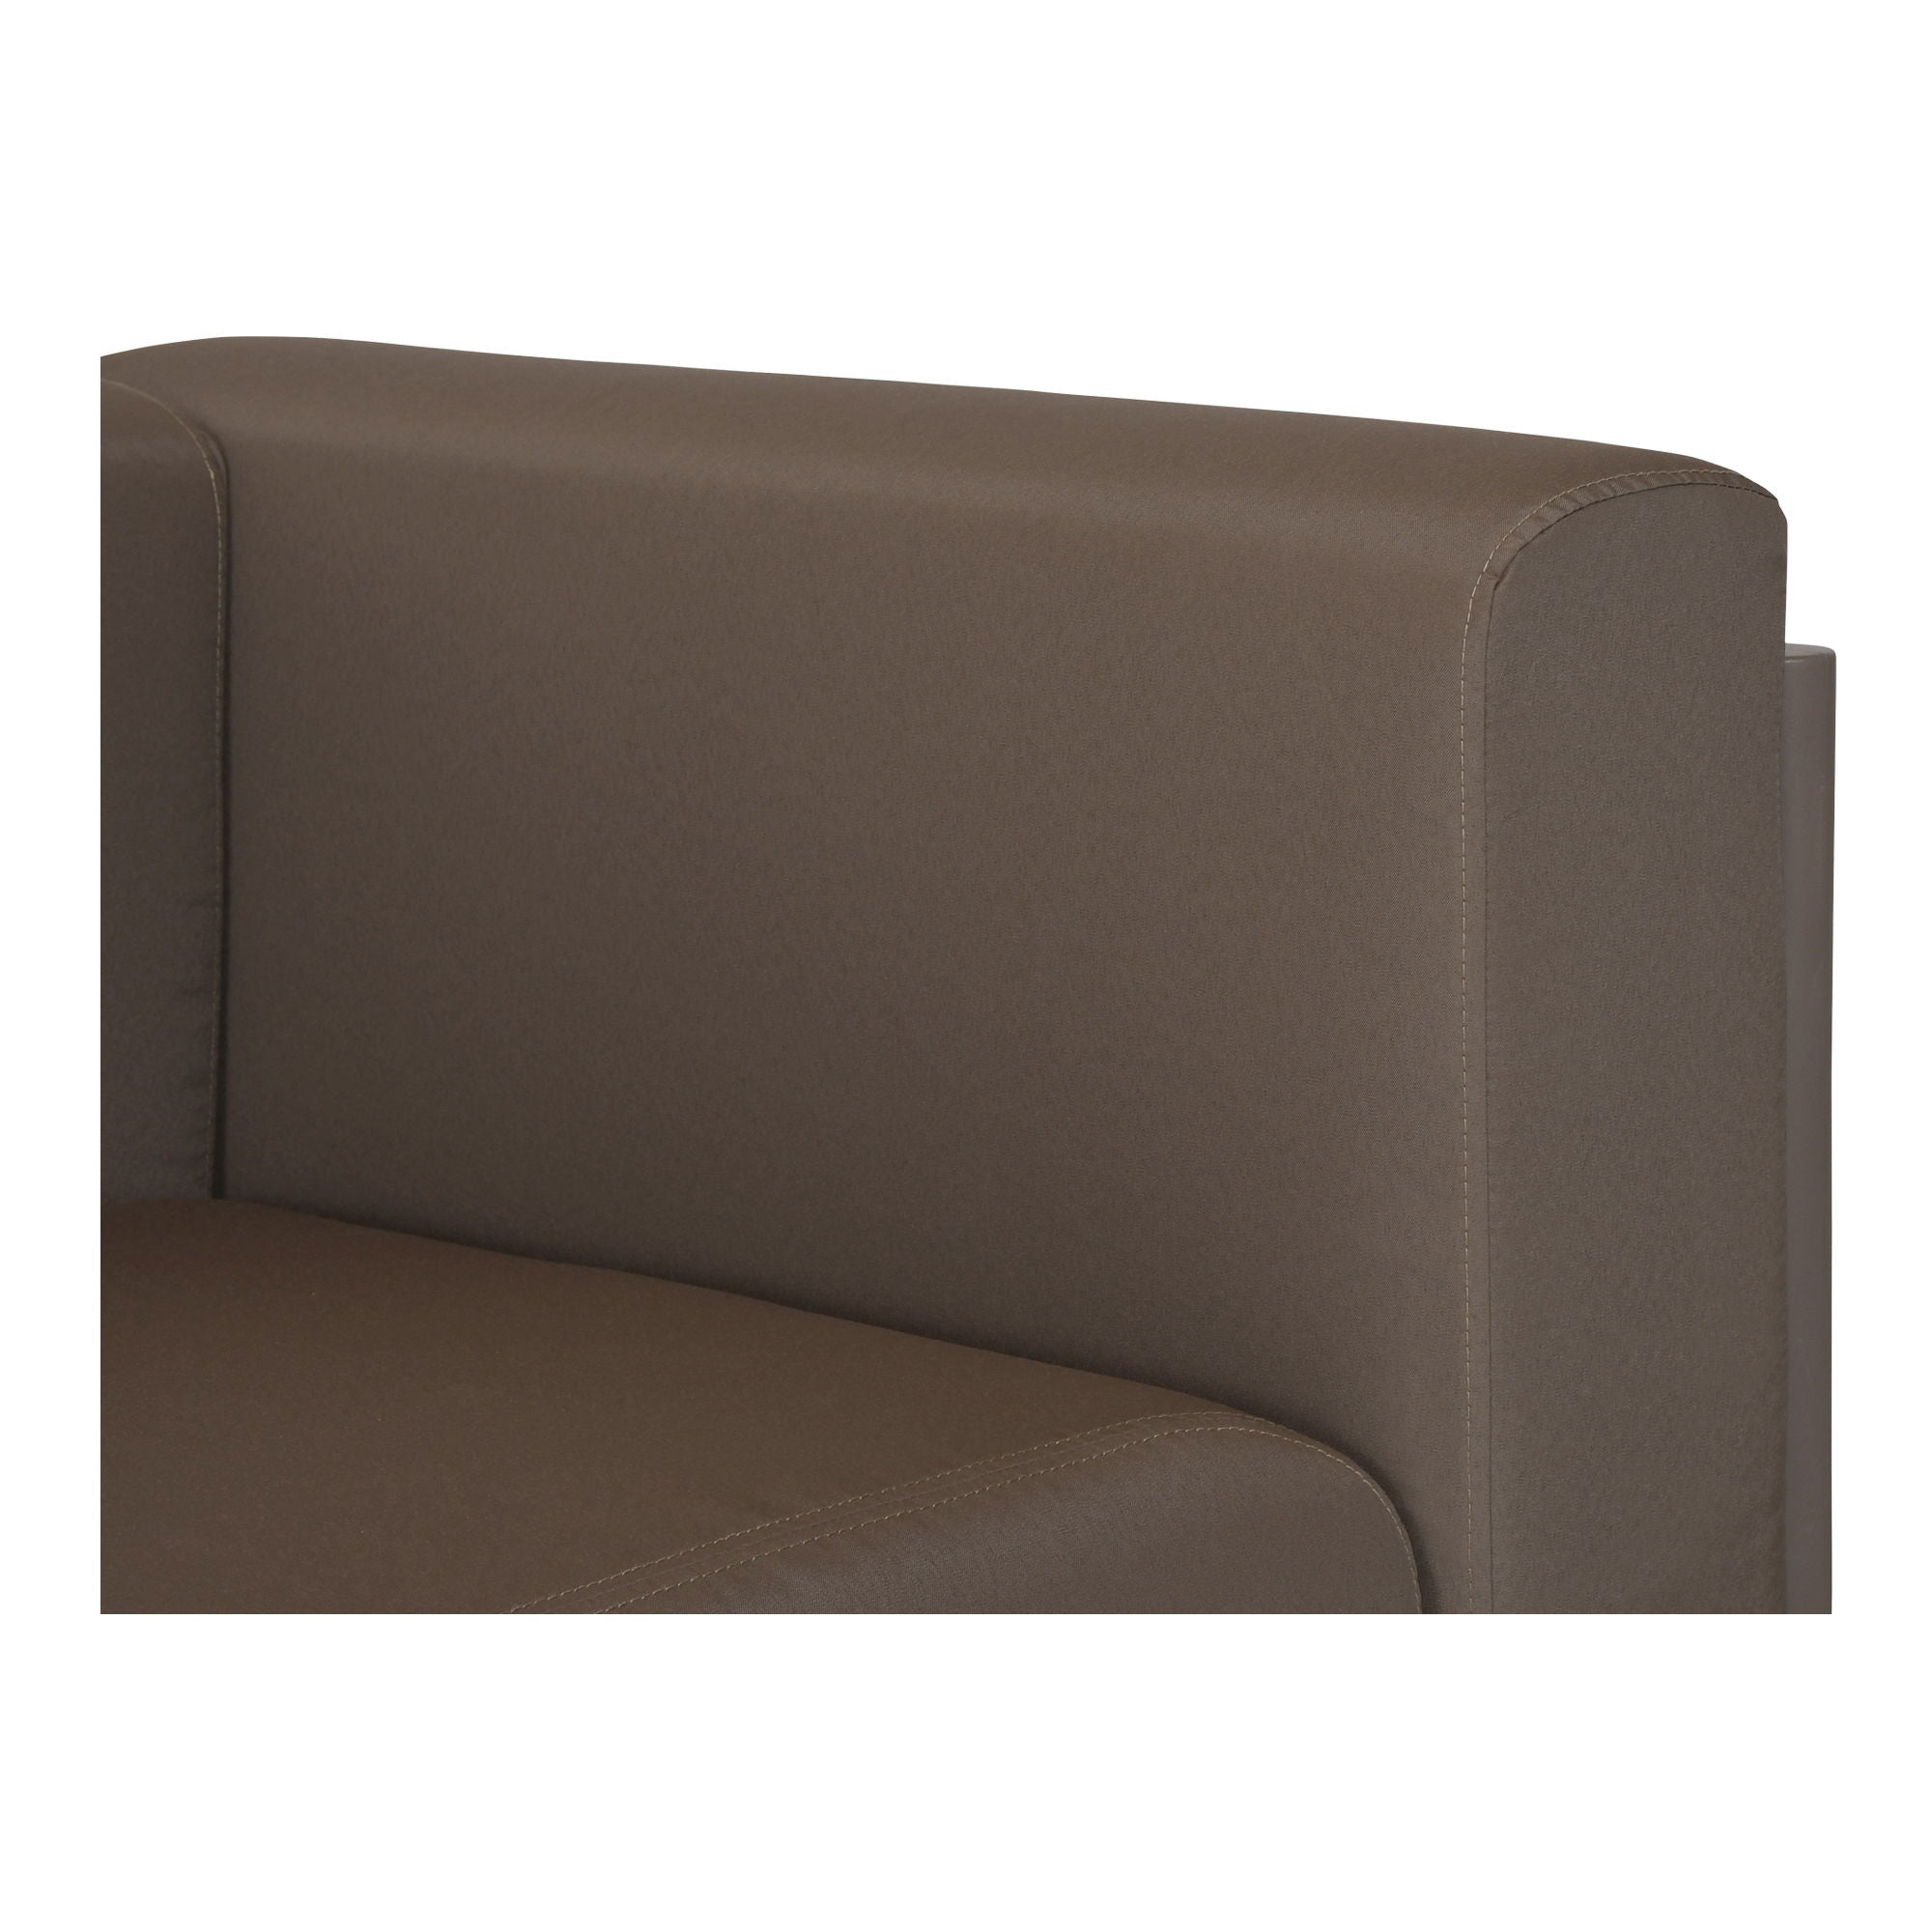 Suri - Outdoor Lounge Chair - Taupe